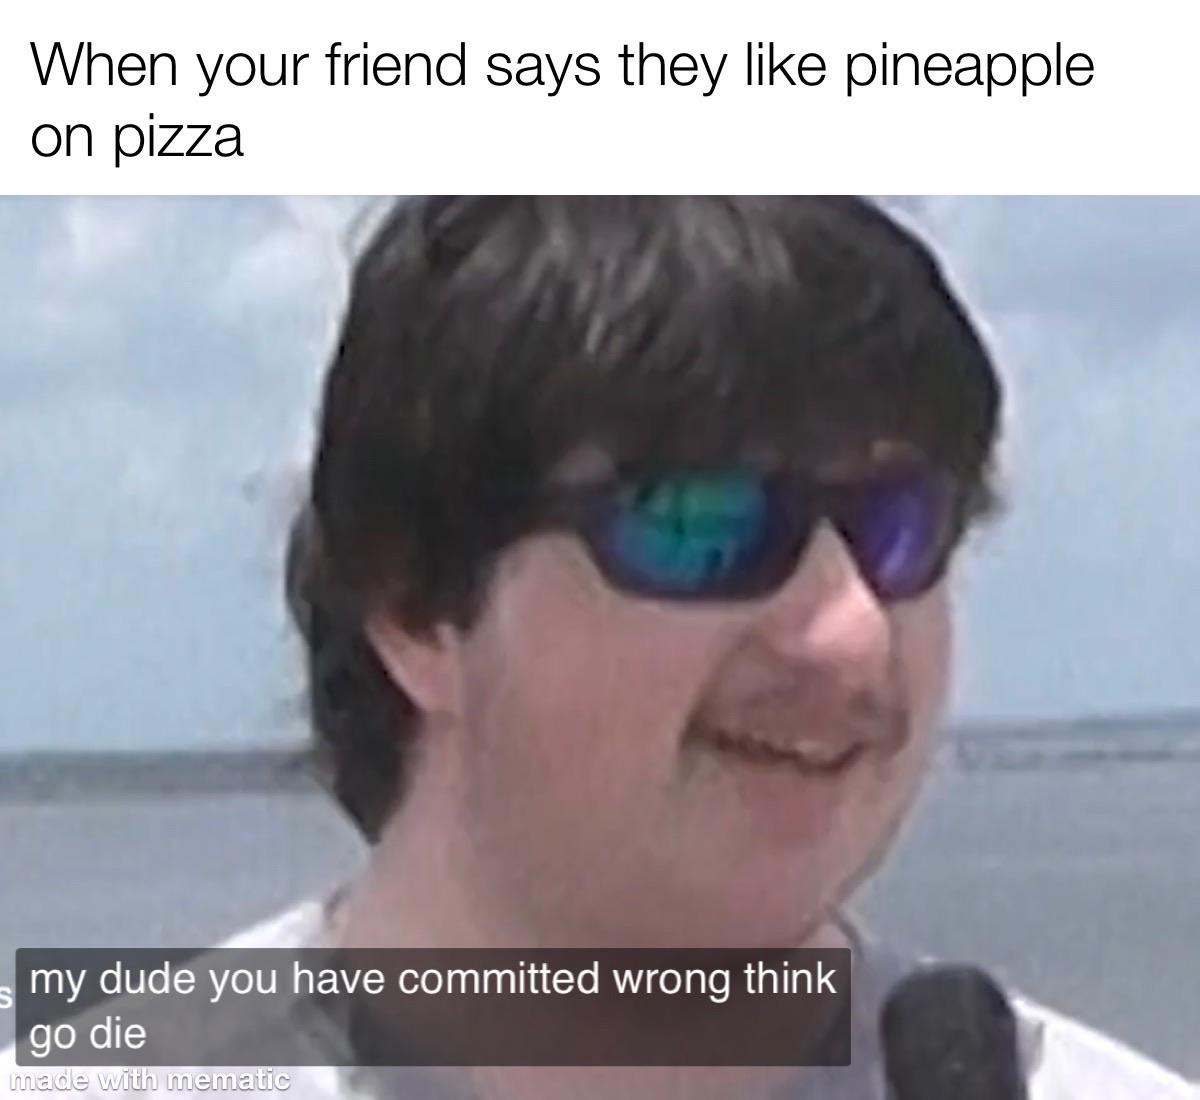 sunglasses - When your friend says they pineapple on pizza my dude you have committed wrong think go die made with mematic